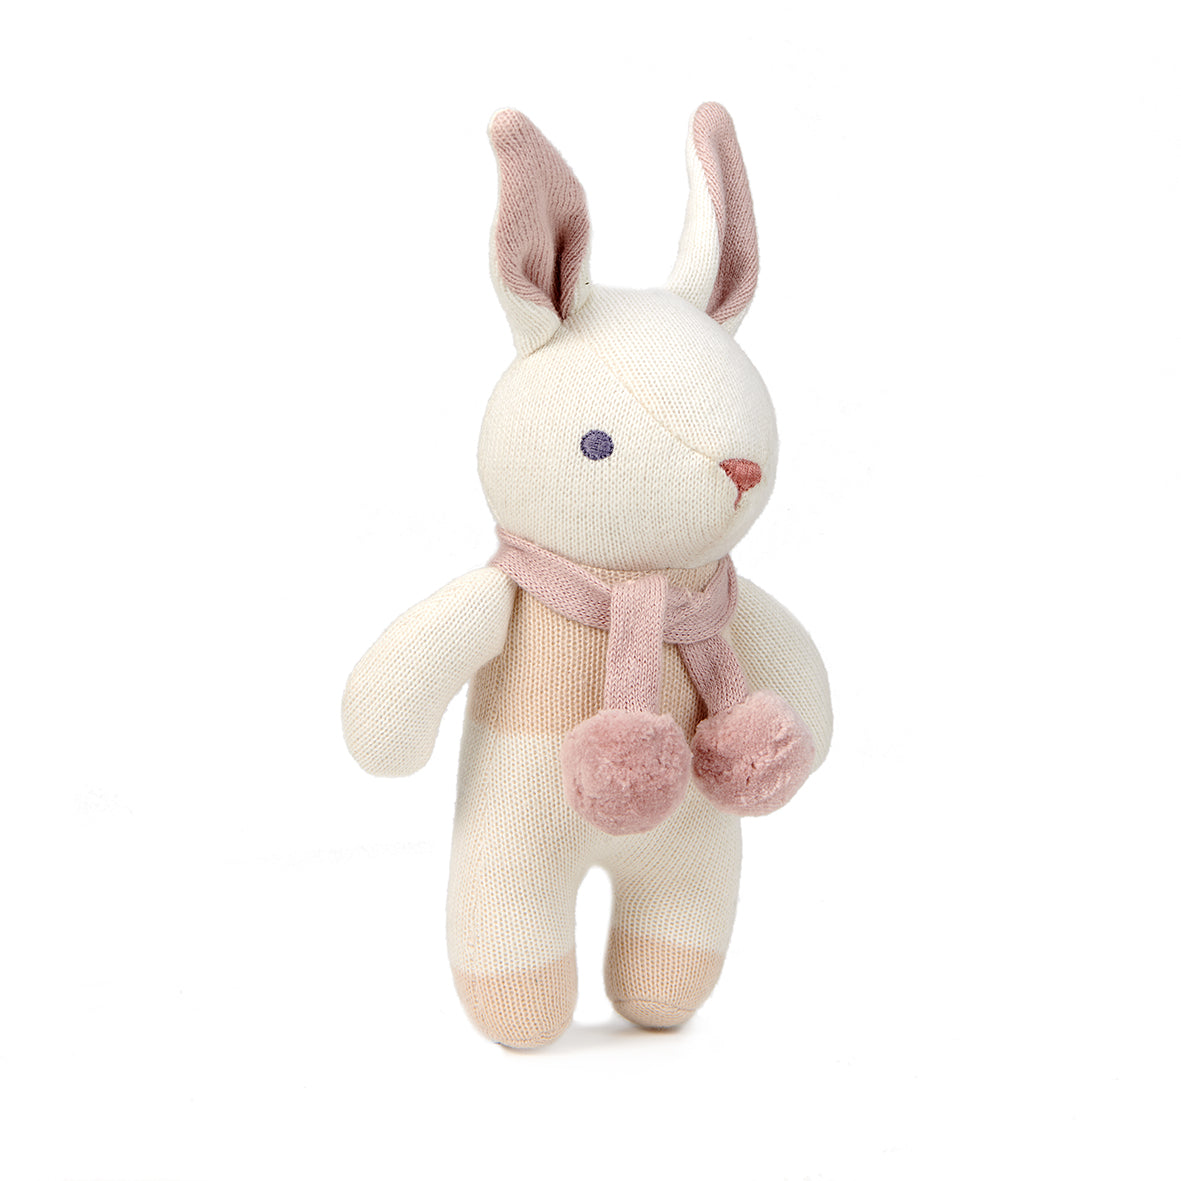 Baby Threads Cream Bunny Rattle Soft Toy for babies GOTS